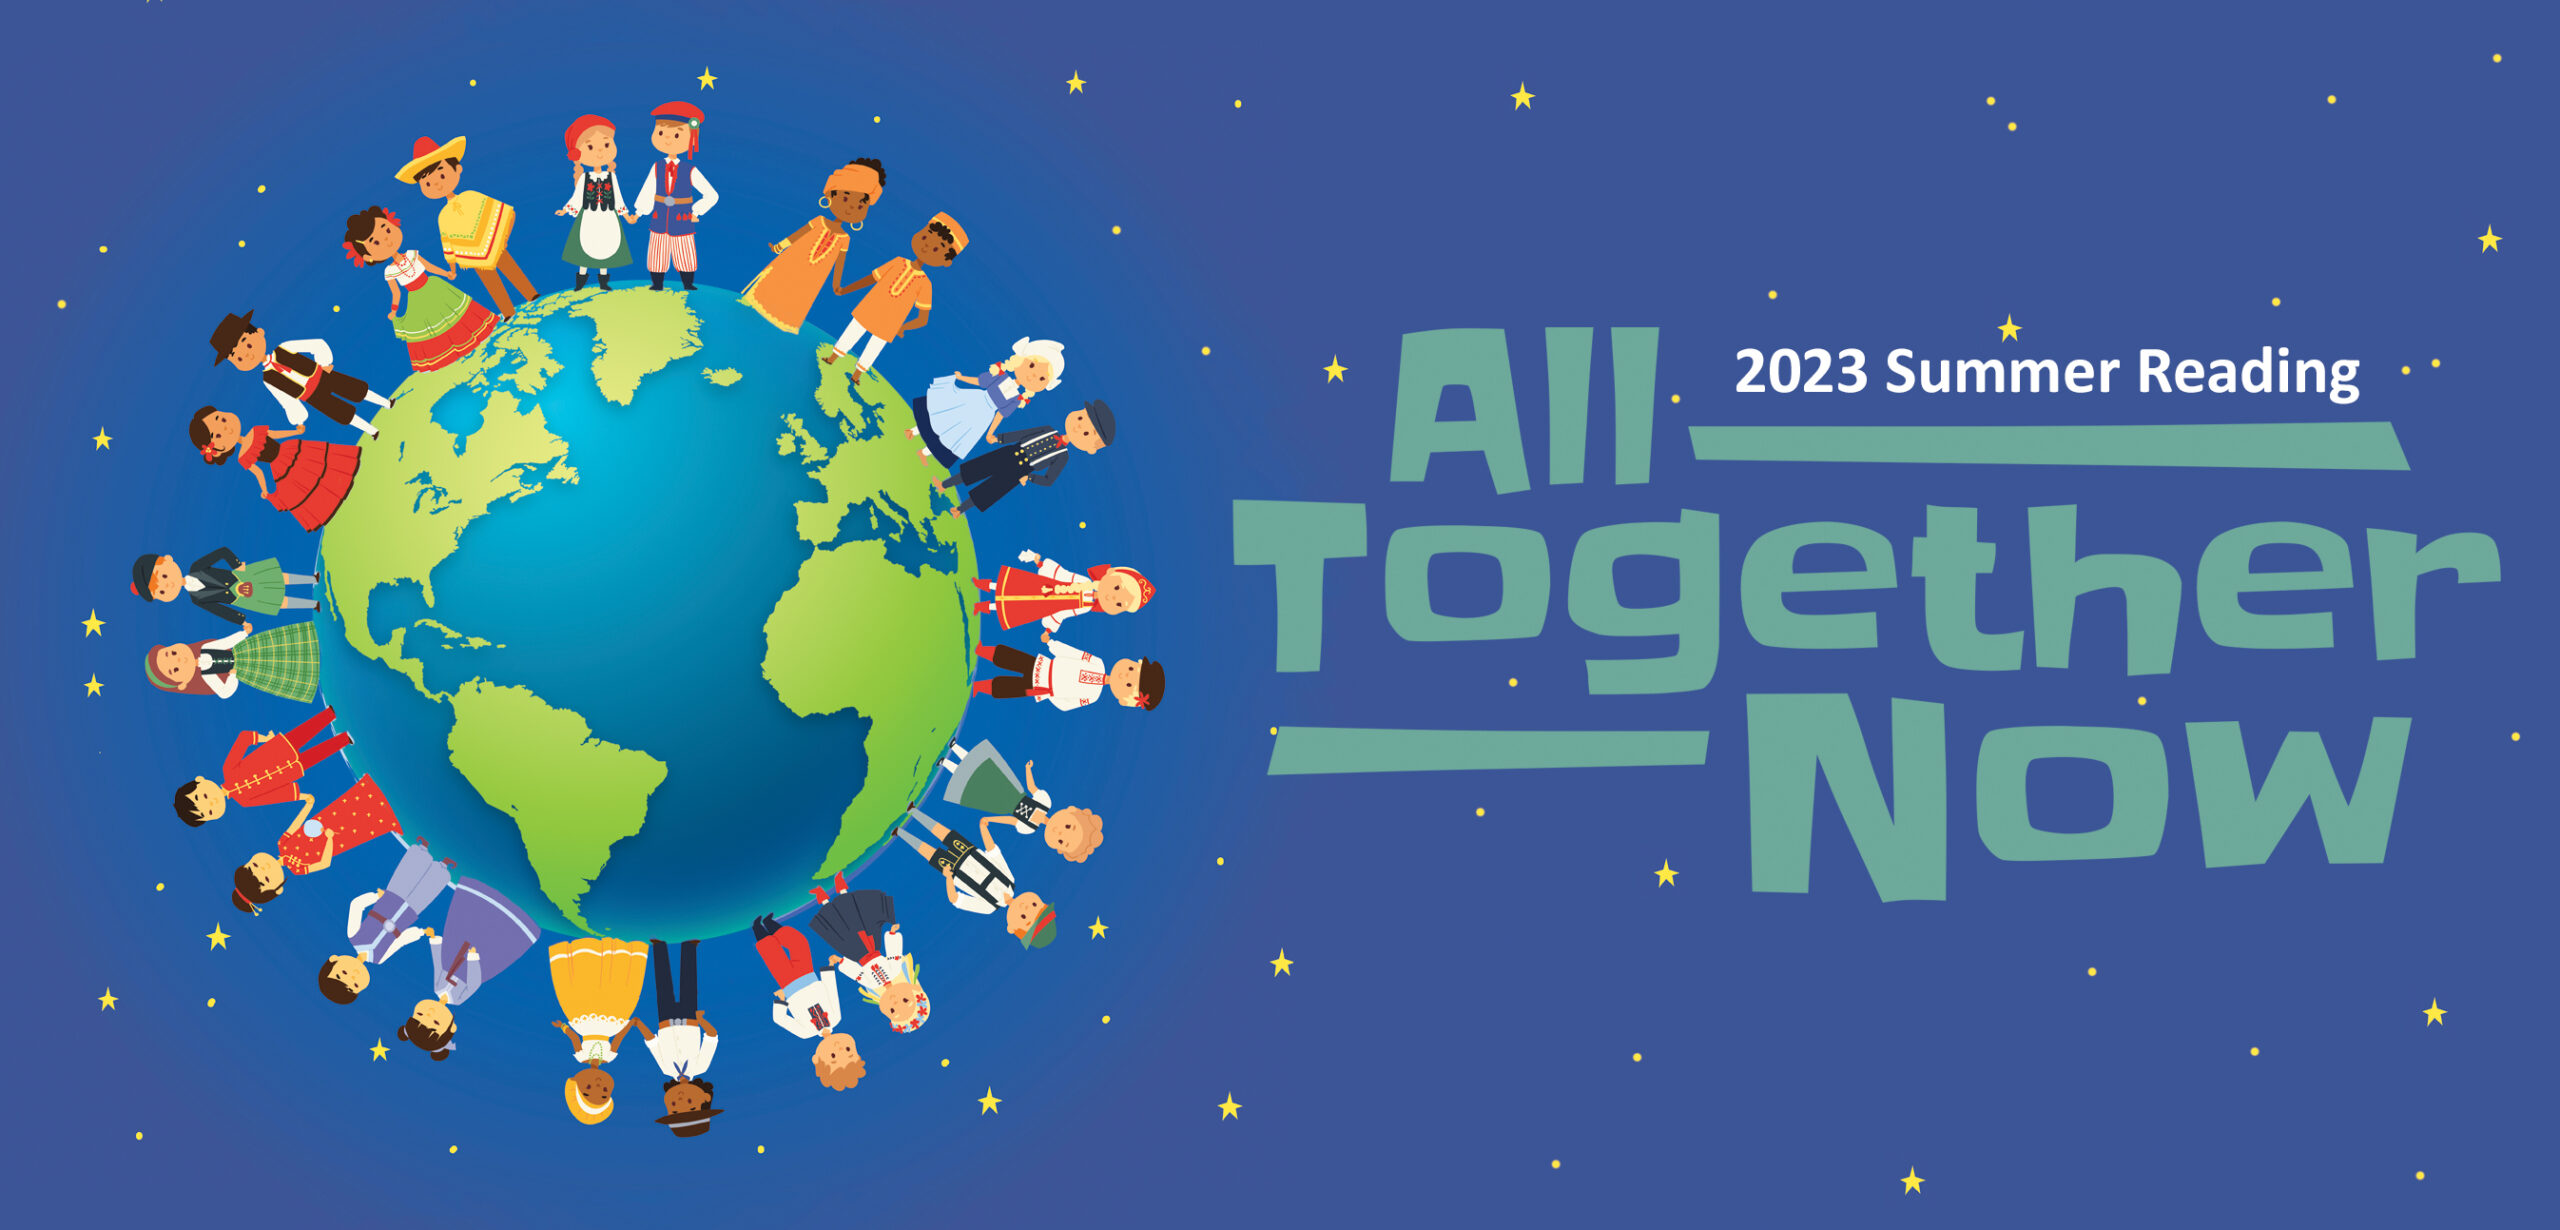 All Together Now - 2023 Banner - Kids holding hands, circled around the earth